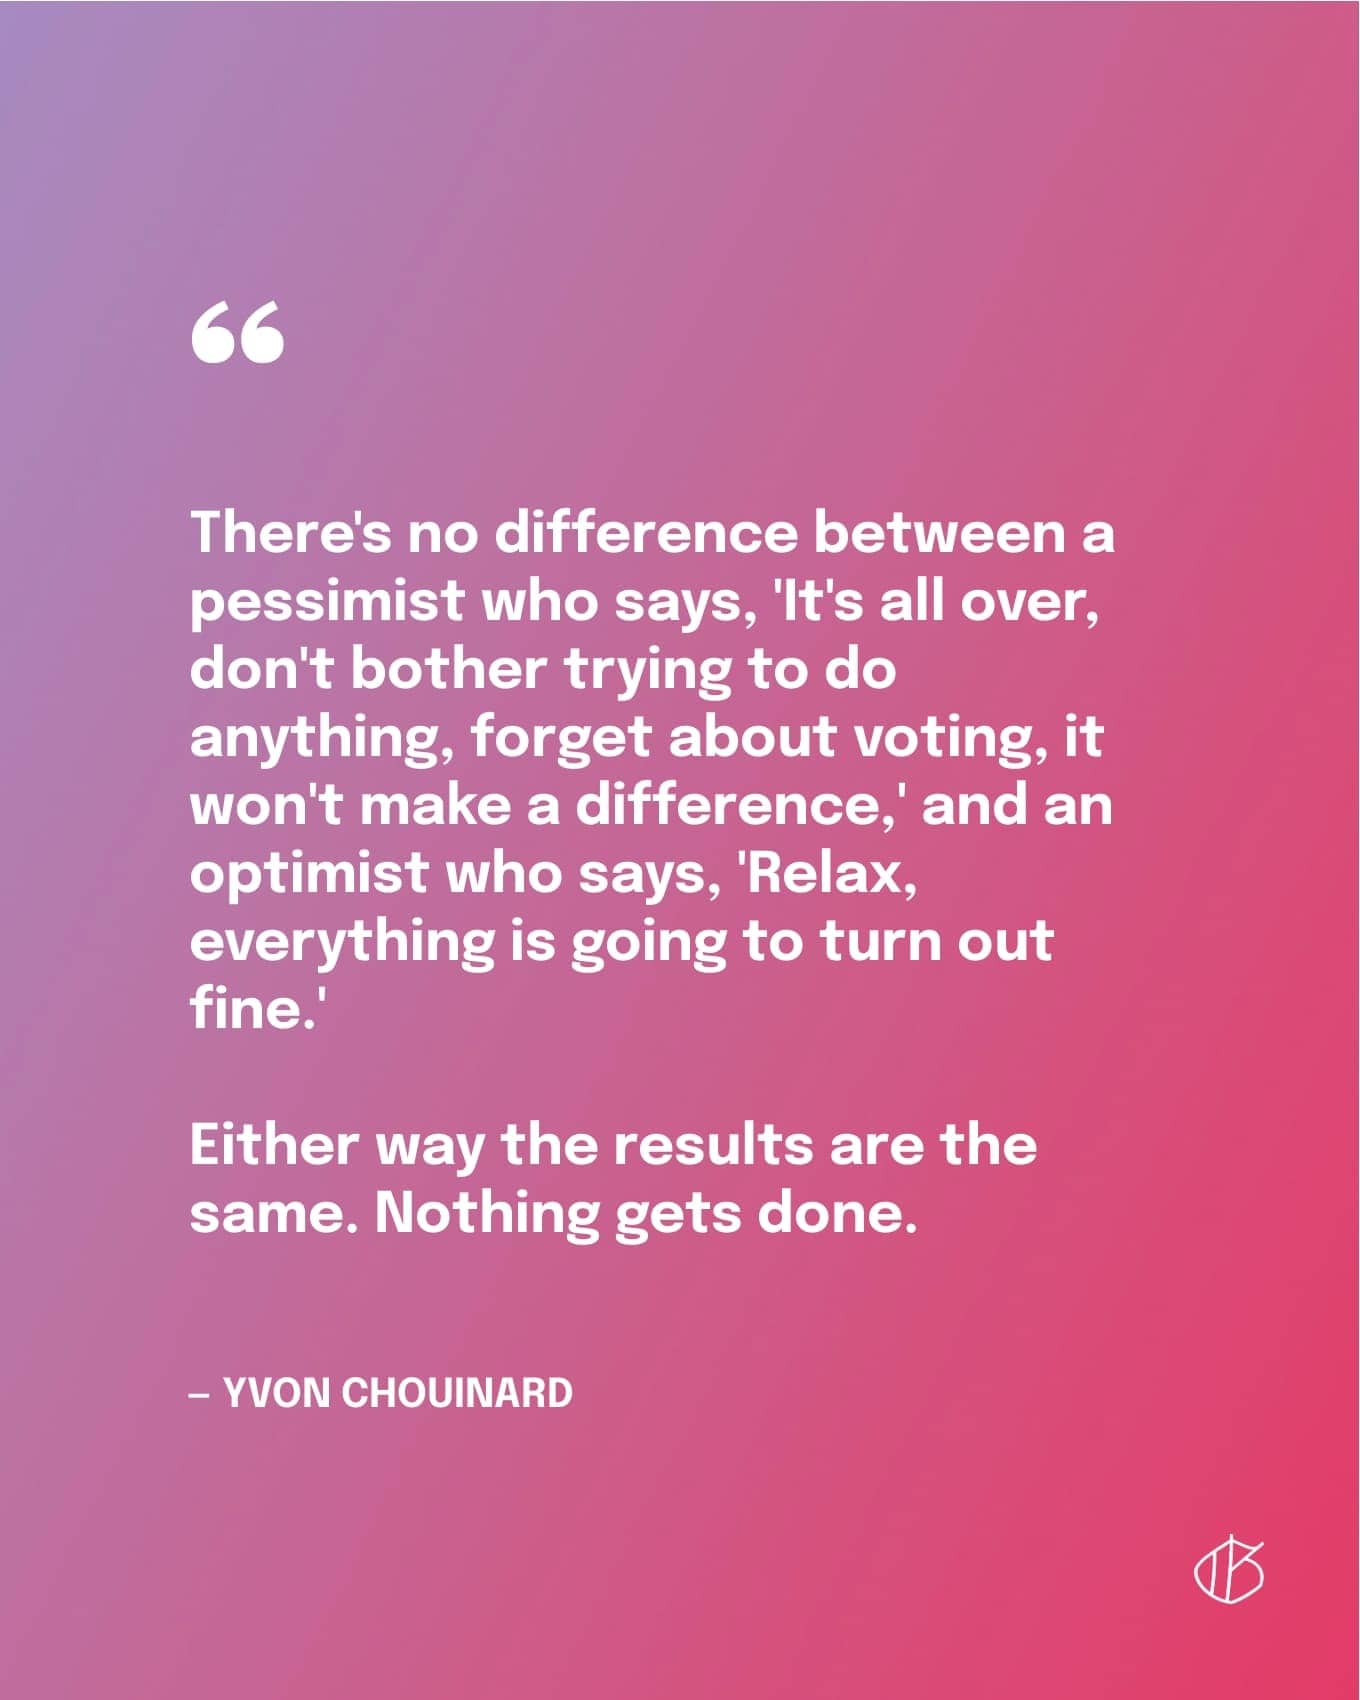 “There's no difference between a pessimist who says, 'It's all over, don't bother trying to do anything, forget about voting, it won't make a difference,' and an optimist who says, 'Relax, everything is going to turn out fine.' Either way the results are the same. Nothing gets done.”— Yvon Chouinard